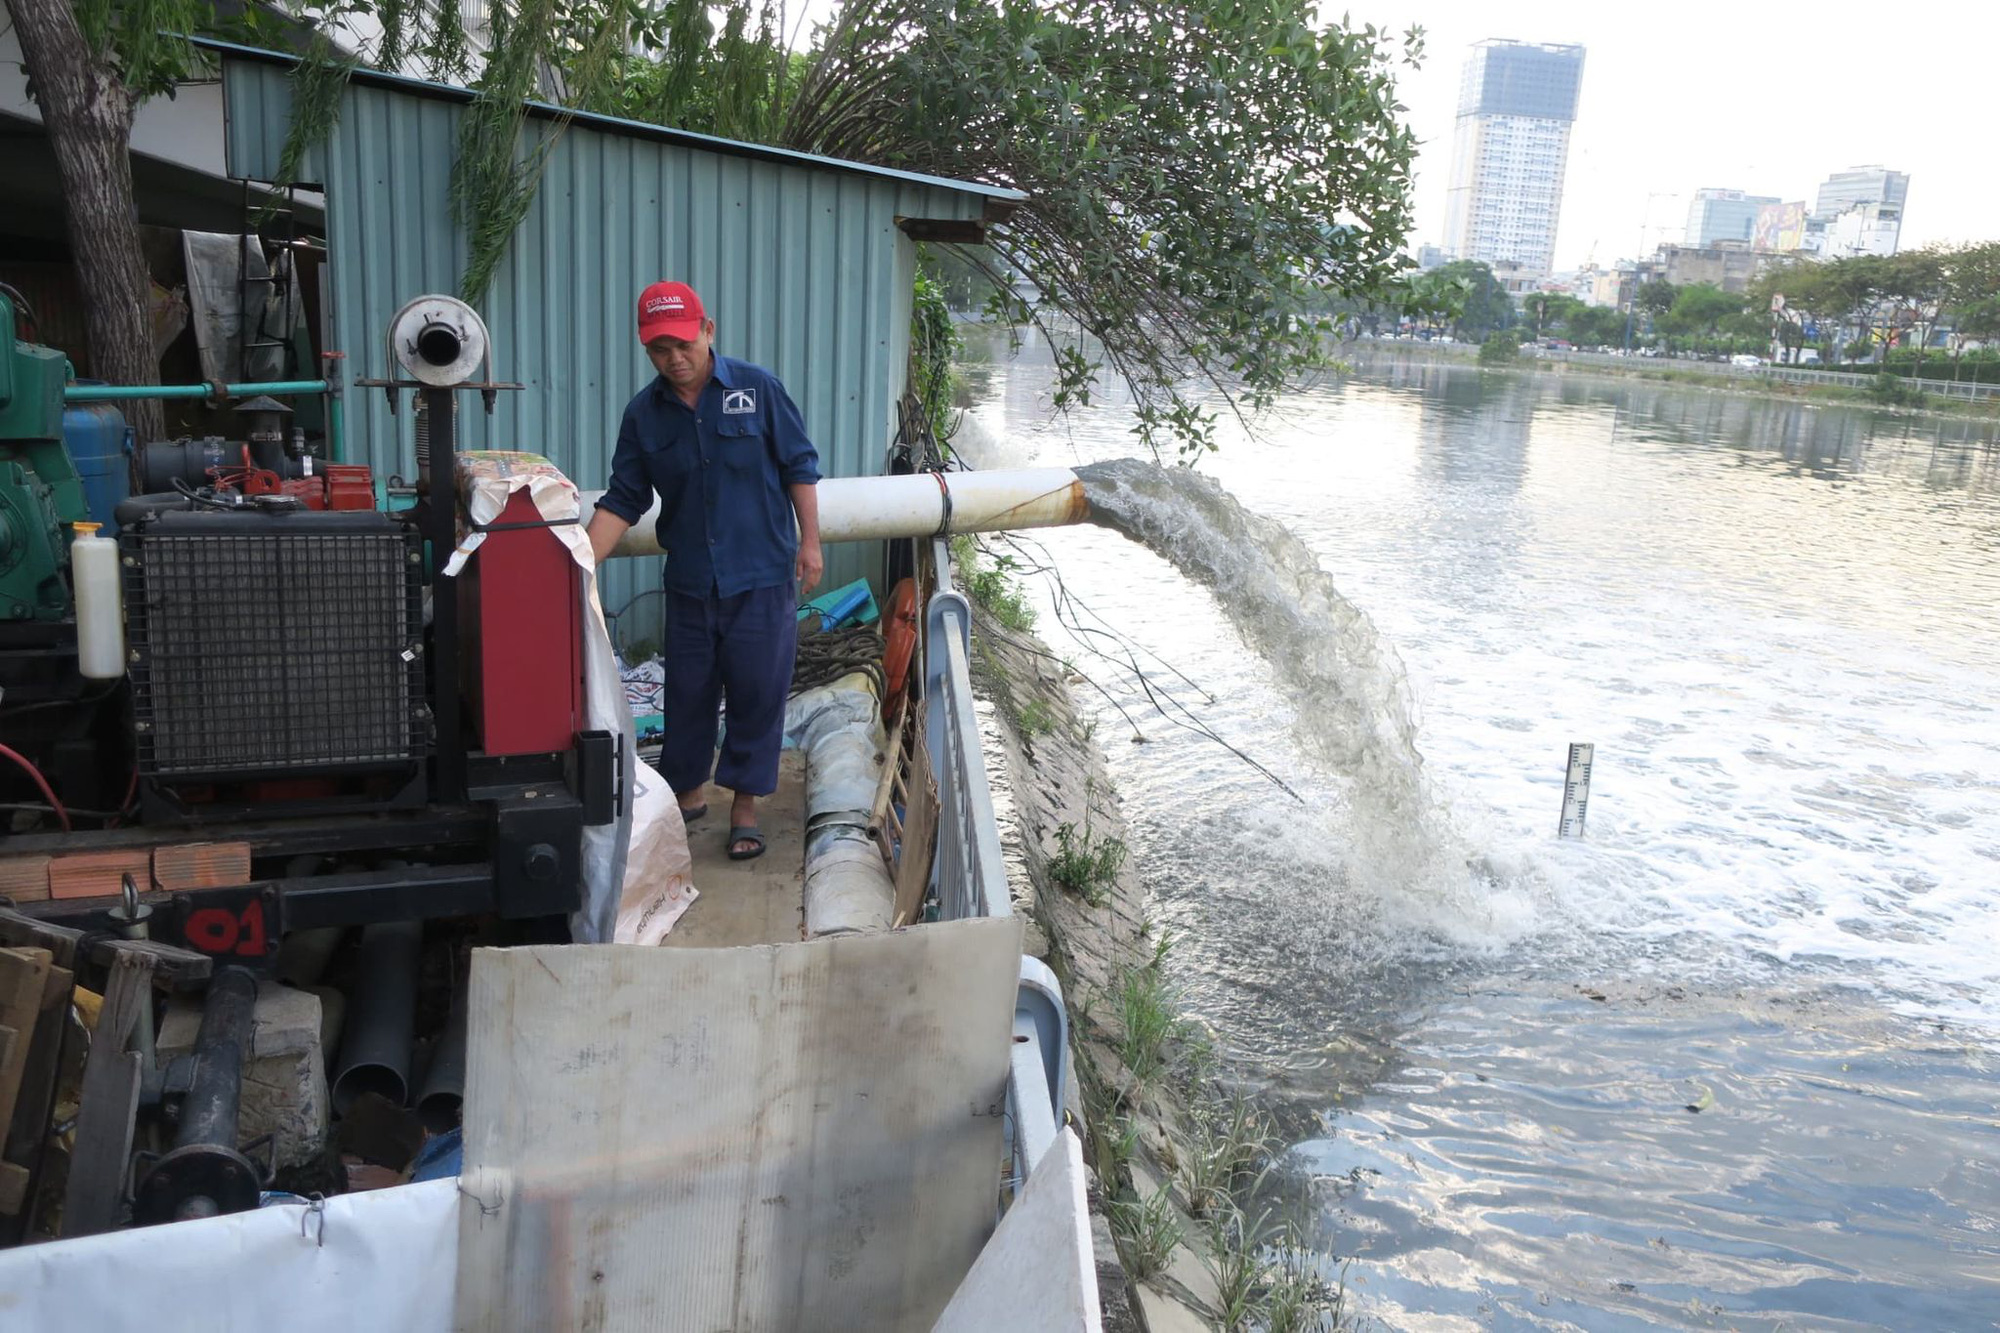 A worker operates a water pump to alleviate flooding in District 4, Ho Chi Minh City, November 16, 2020. Photo: T.T.D. / Tuoi Tre